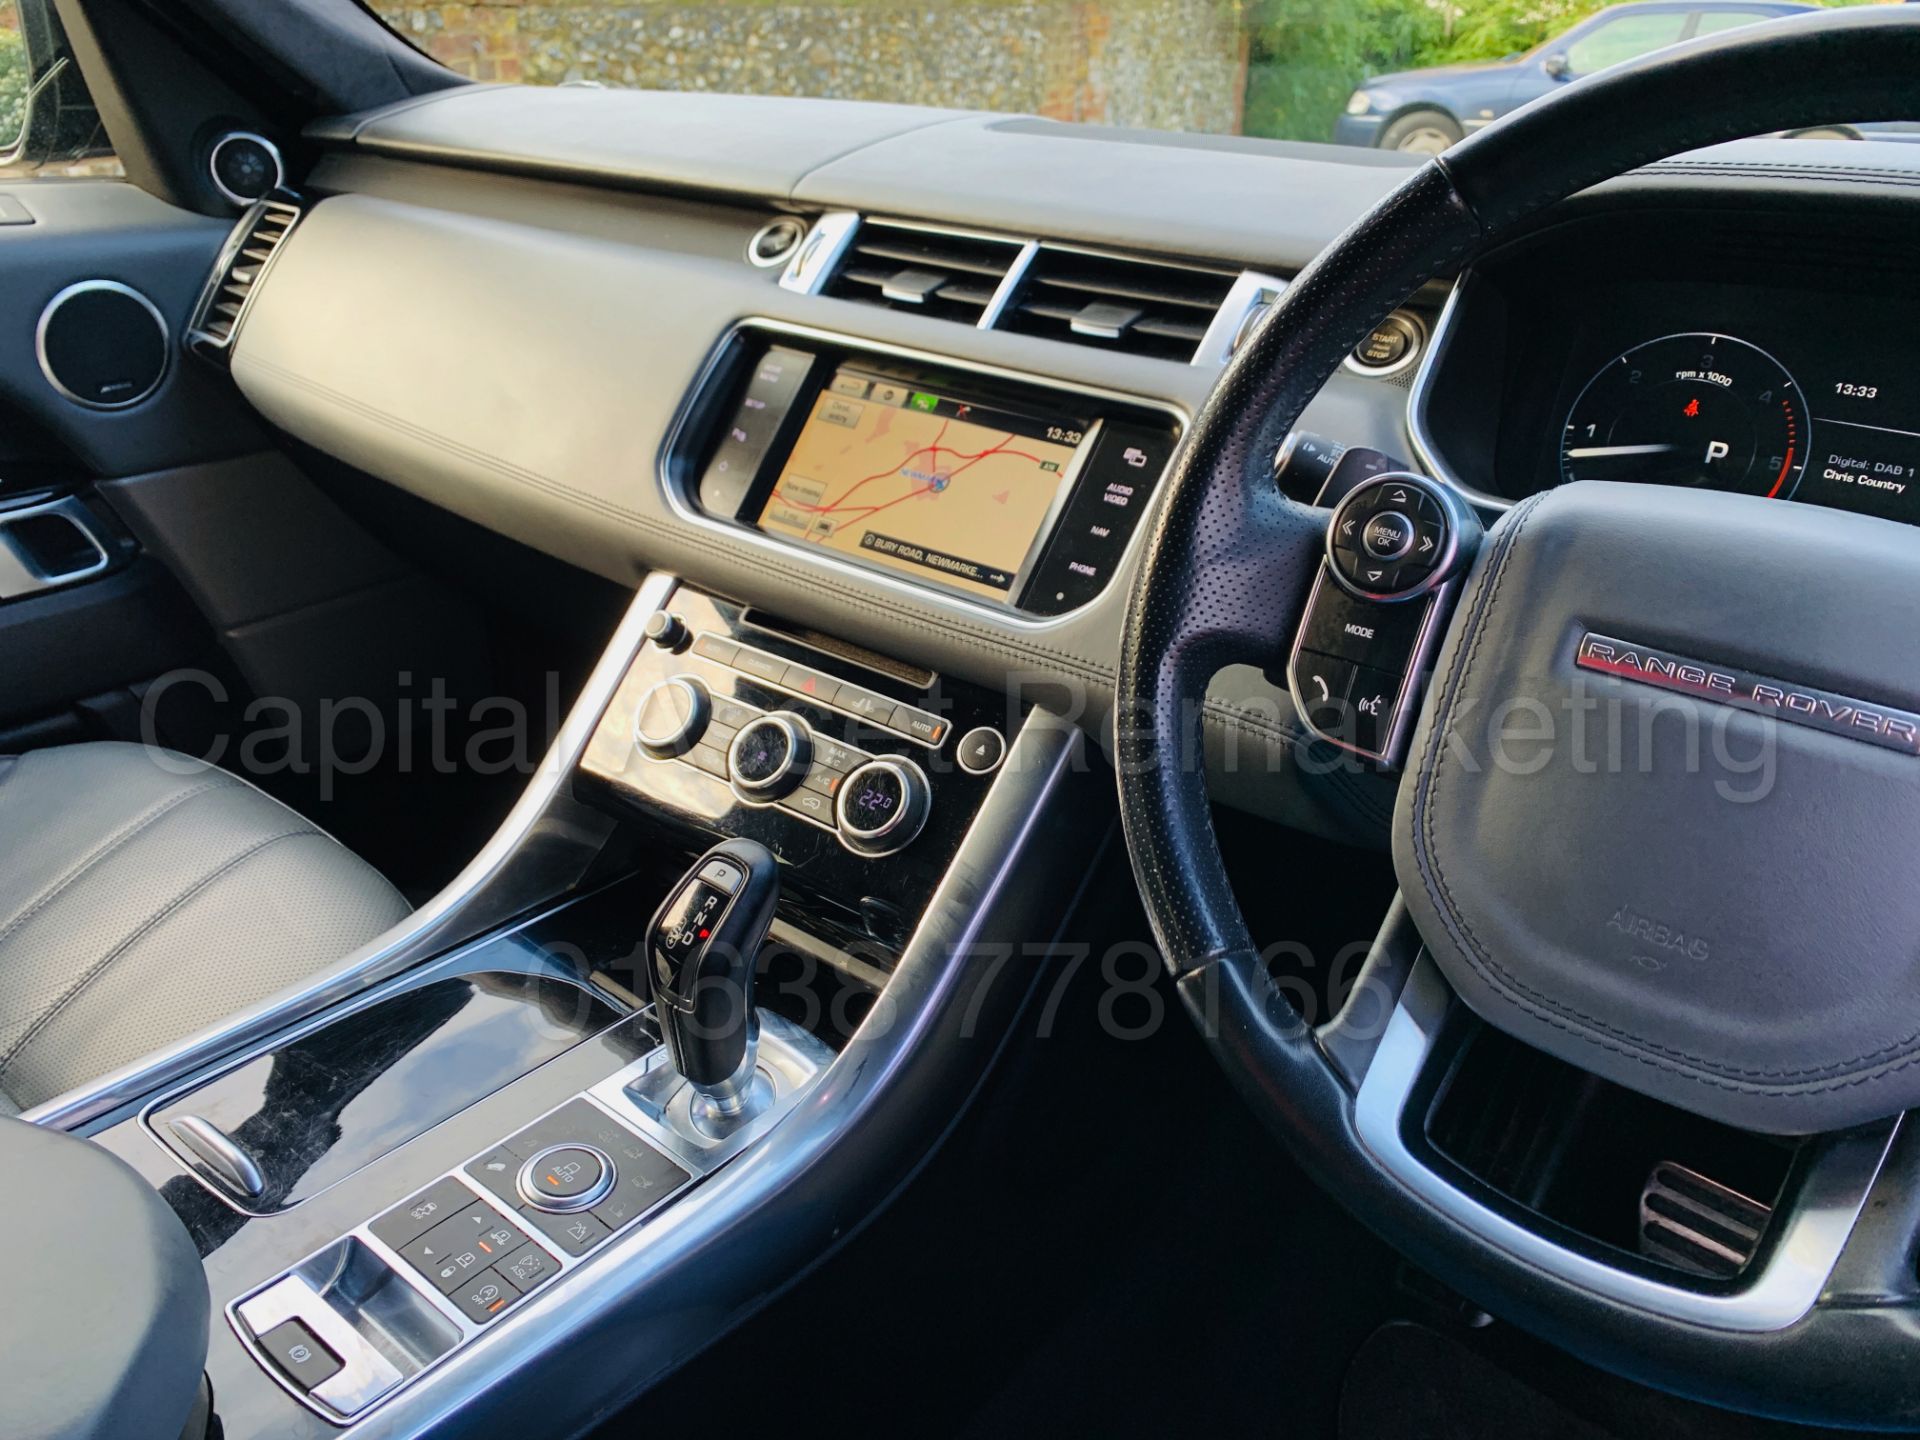 On Sale RANGE ROVER SPORT *AUTOBIOGRAPHY DYNAMIC* (2015 MODEL) '3.0 SDV6 - 8 SPEED AUTO' HIGE SPEC - Image 70 of 85